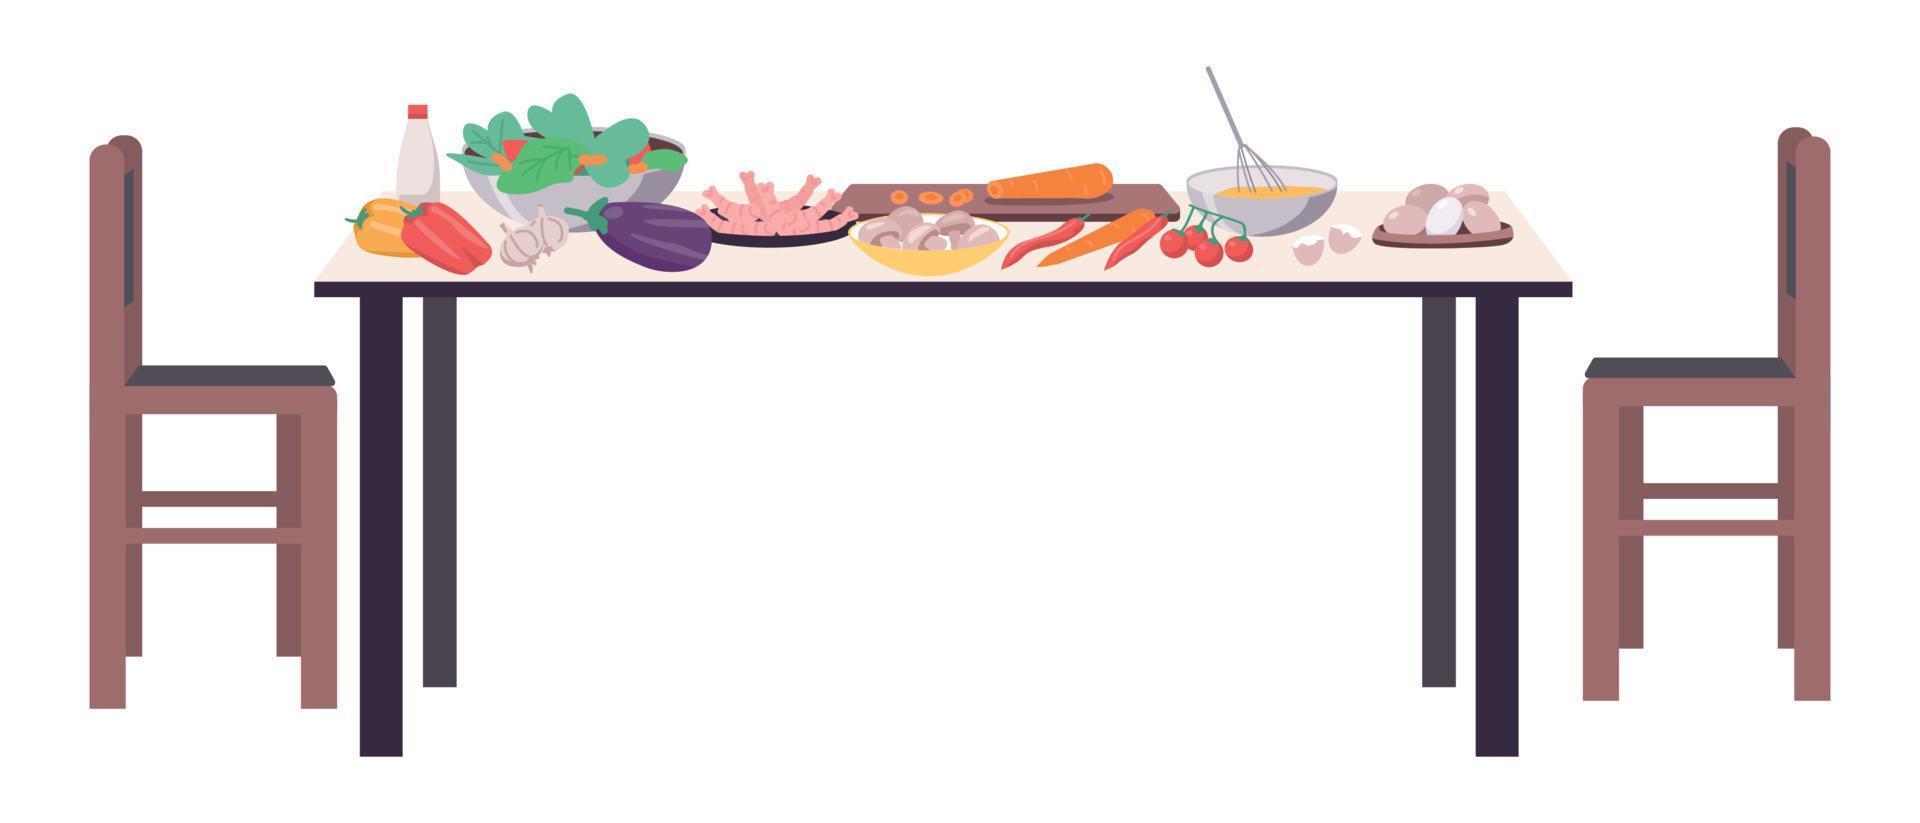 Preparing dishes for evening semi flat color vector object